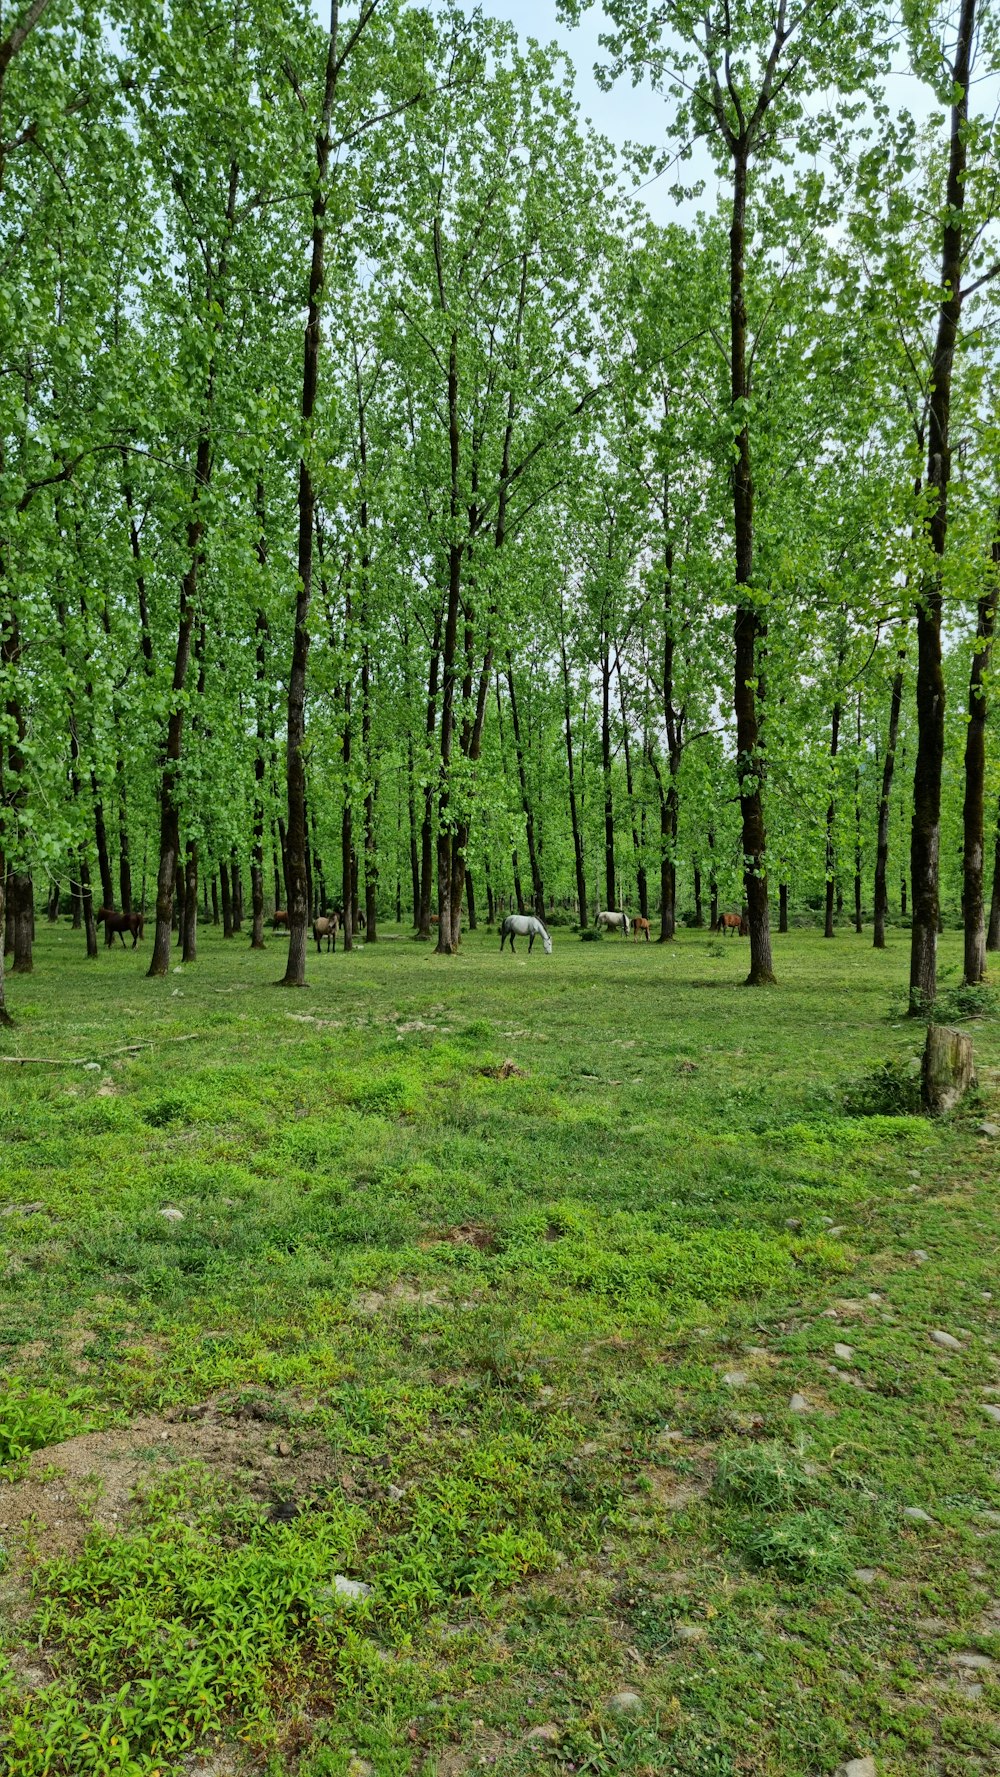 a grassy field with trees in the background